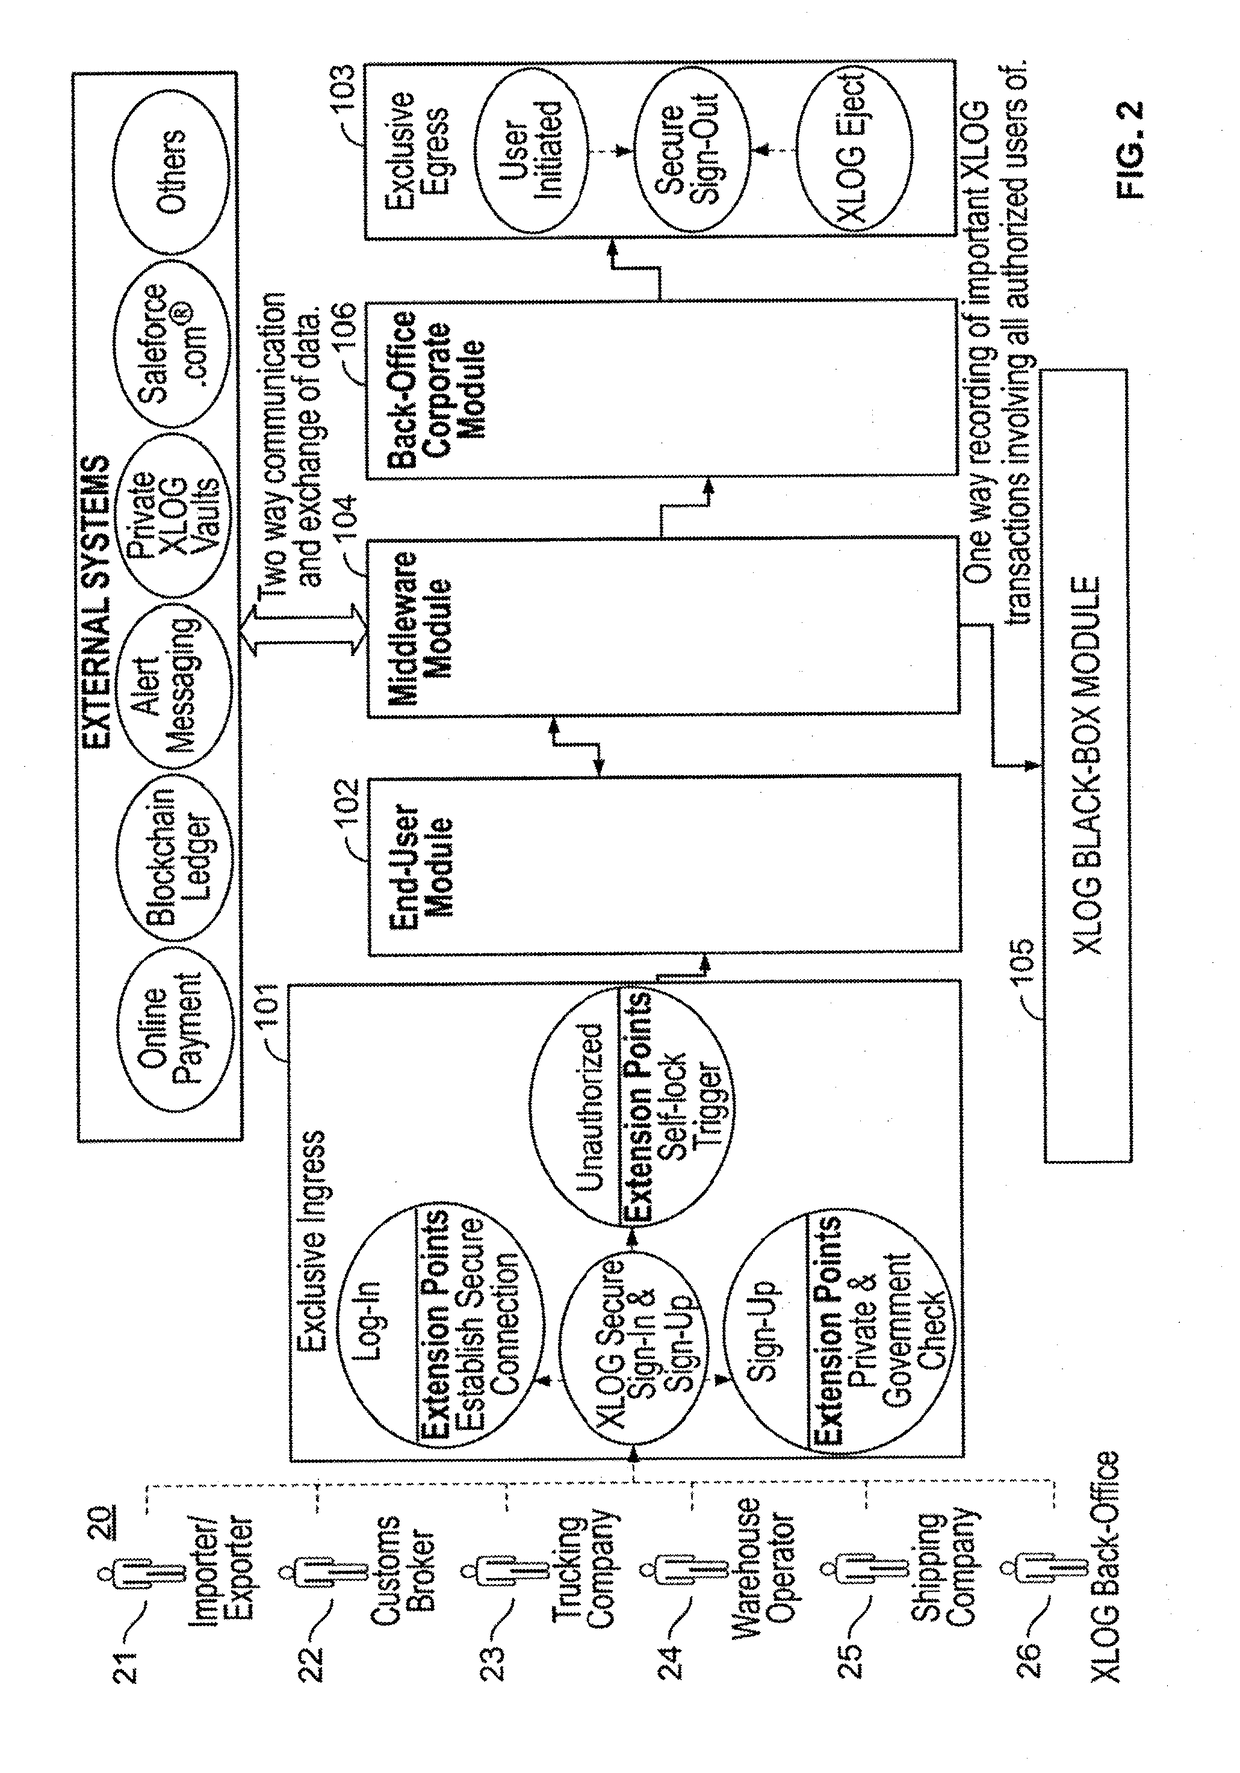 Method, system, apparatus, and program for real-time and online freight management